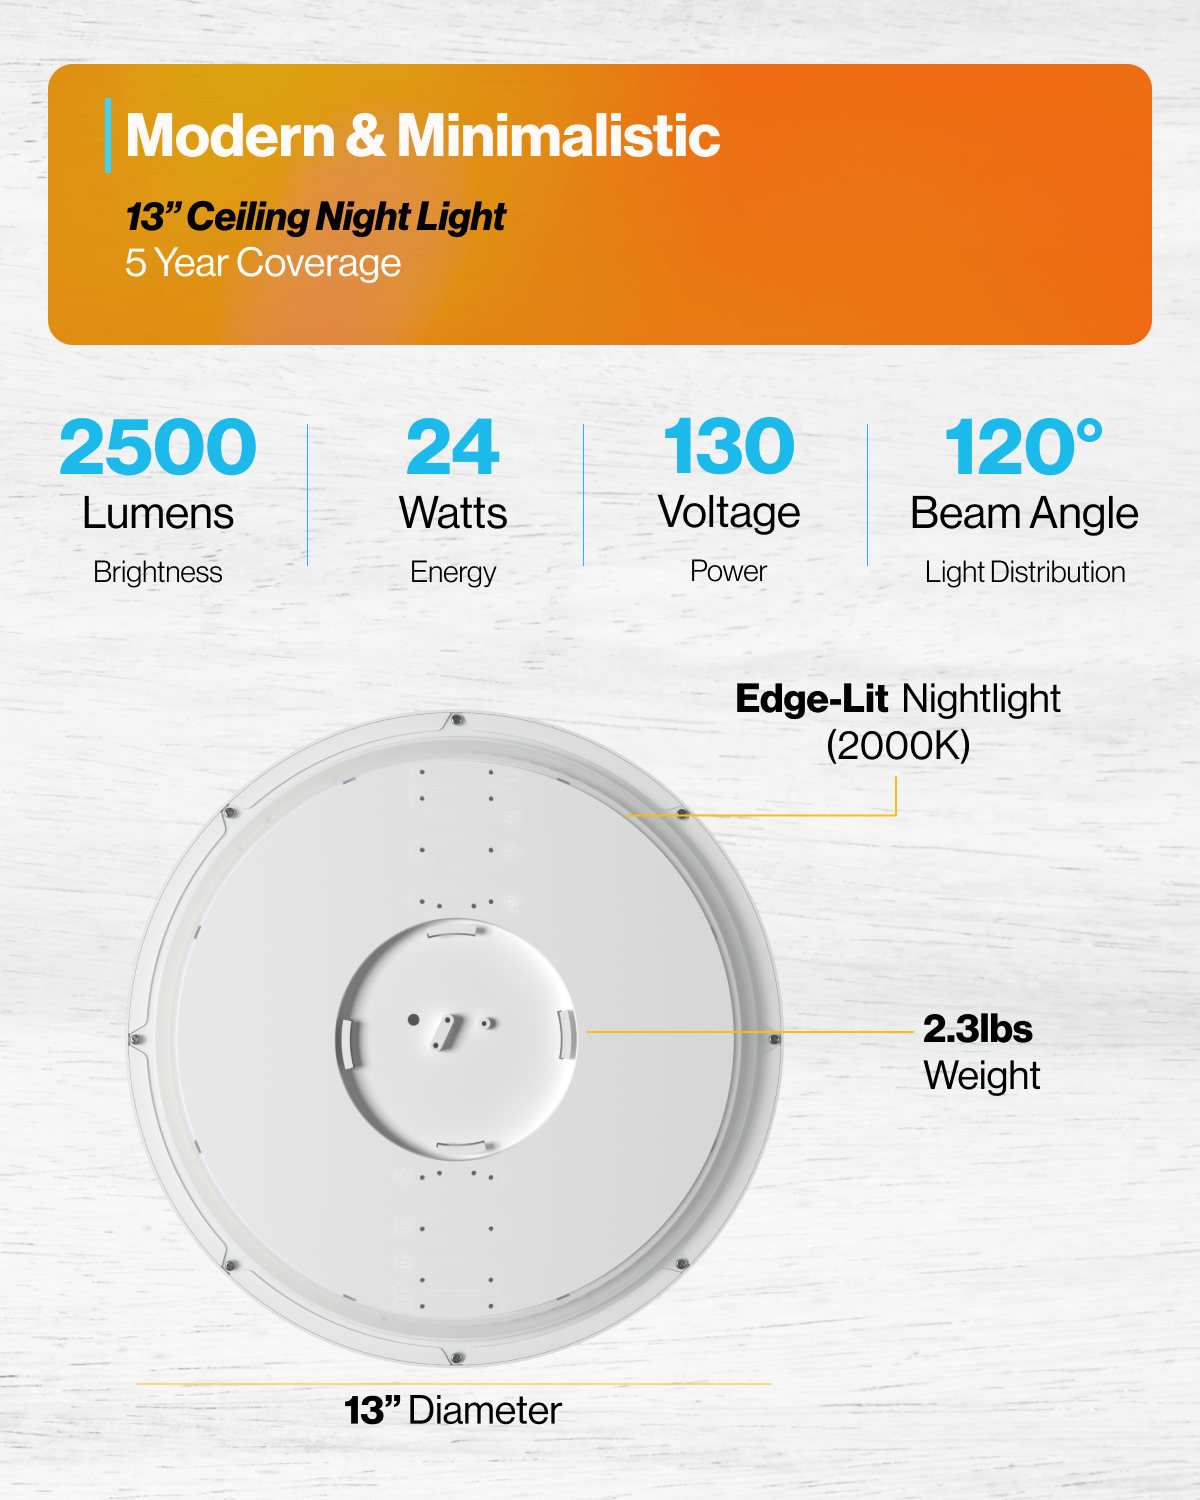 Sunco Lighting 13" Selectable White Ceiling Nightlight Specifications 2500 Lumens 24 Watts 130 Voltage 120 Beam Angle